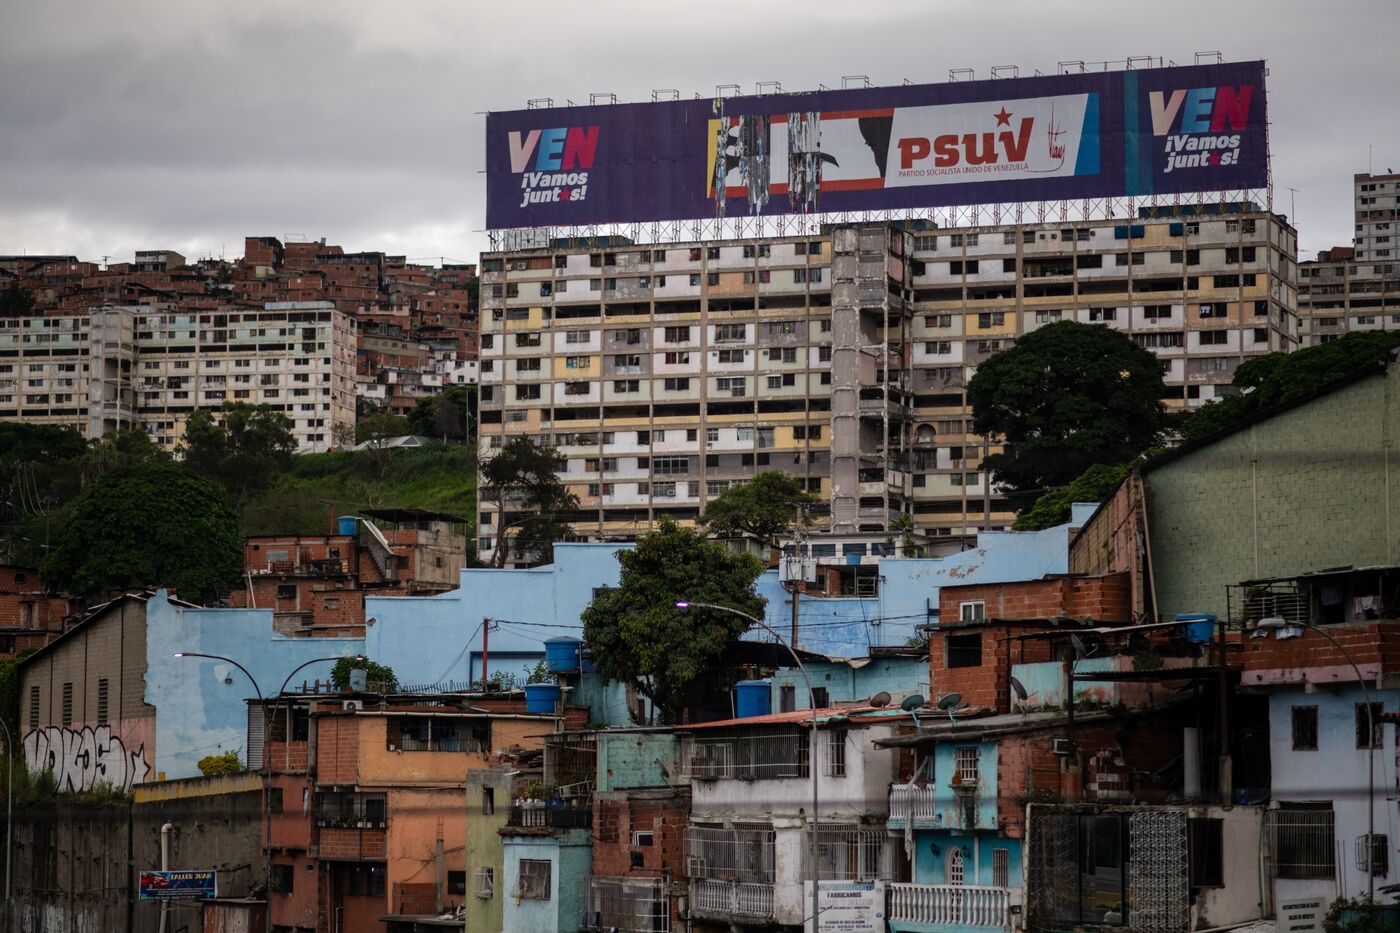 relates to Hugo Chavez and Socialism Get Erased From the Caracas Skyline